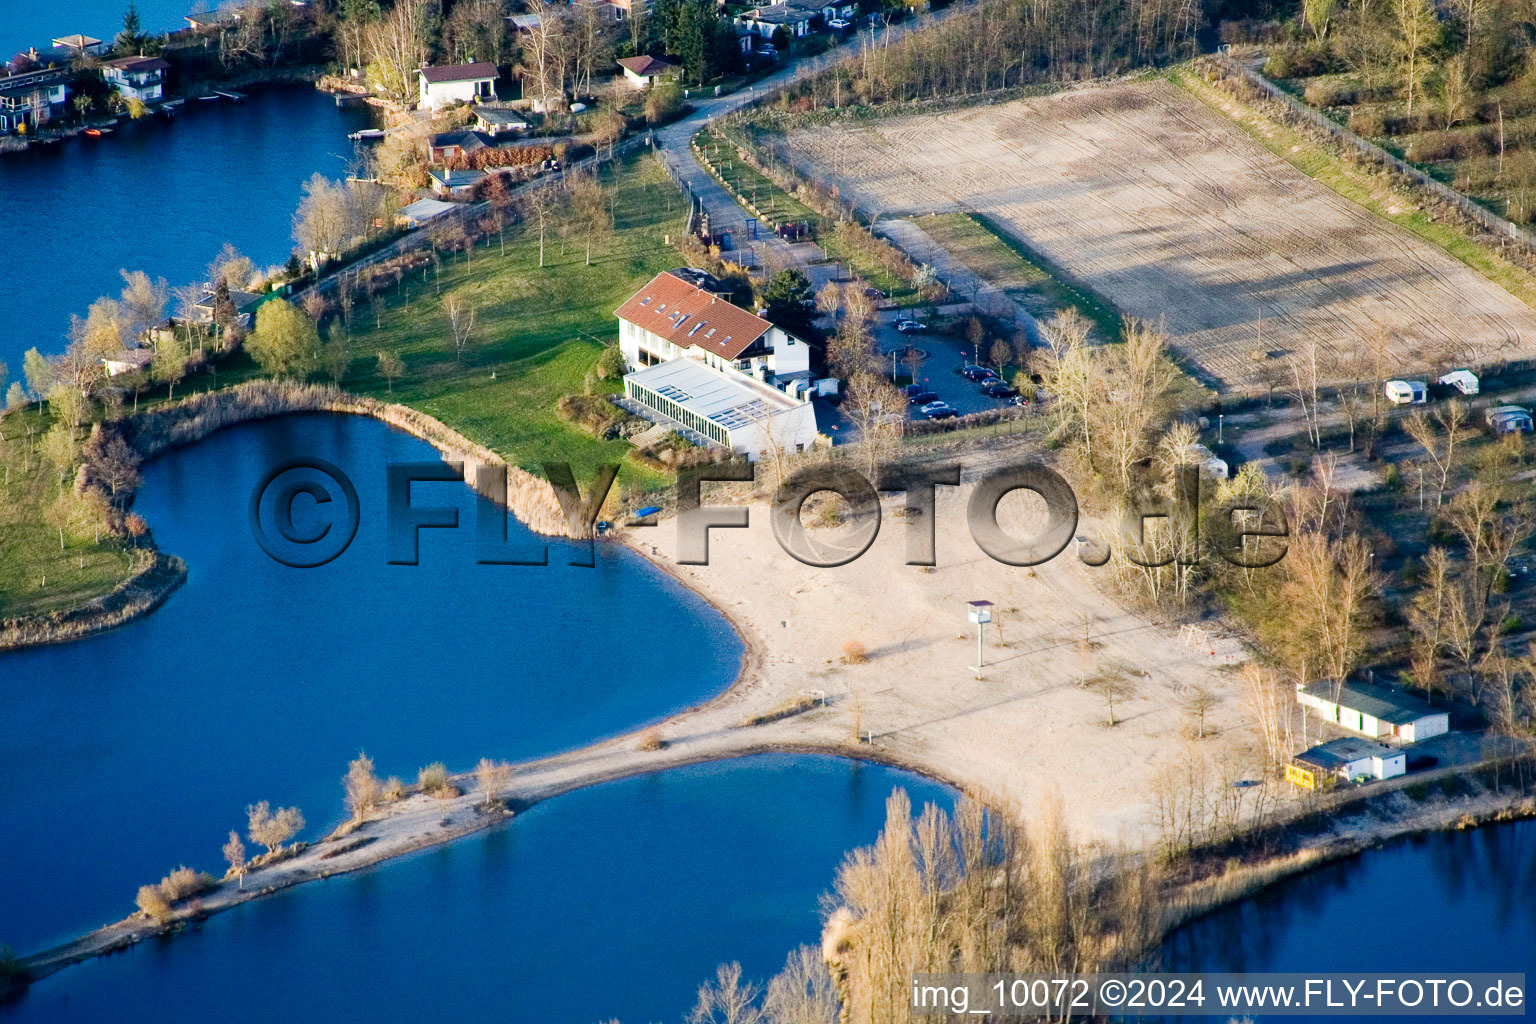 Aerial photograpy of Lakes and beach areas on the recreation area Blaue Adria in the district Riedsiedlung in Altrip in the state Rhineland-Palatinate